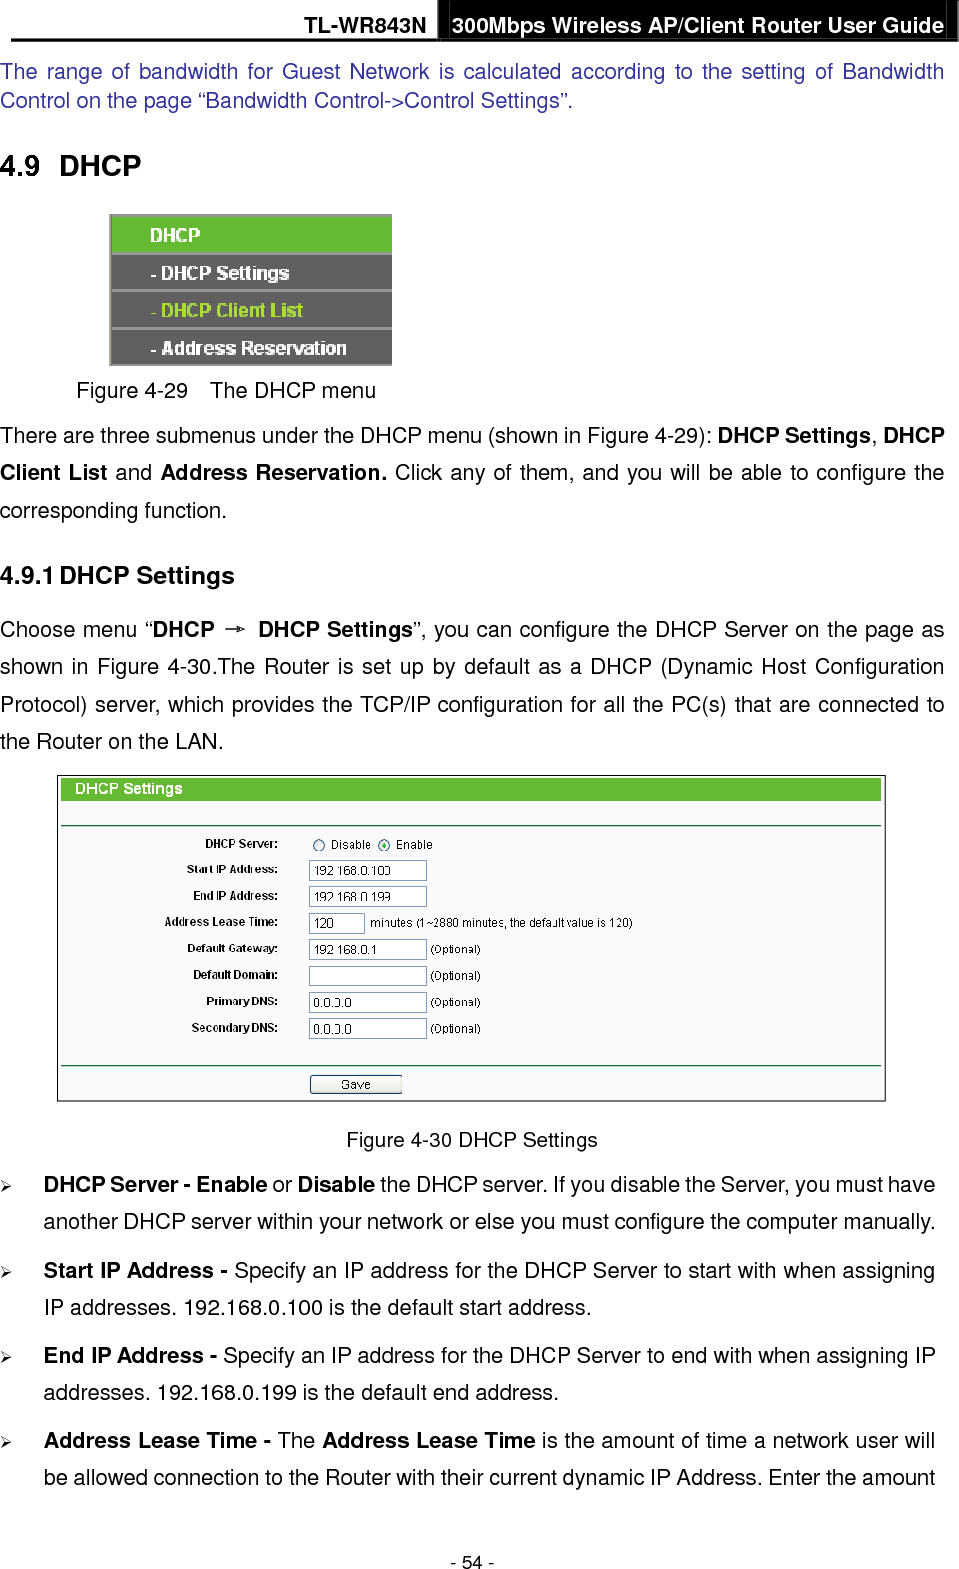 TL-WR843N 300Mbps Wireless AP/Client Router User Guide - 54 - The range of bandwidth for Guest Network is calculated according to the setting of Bandwidth Control on the page “Bandwidth Control-&gt;Control Settings”. DHCP Figure 4-29  The DHCP menu There are three submenus under the DHCP menu (shown in Figure 4-29): DHCP Settings, DHCP Client List and Address Reservation. Click any of them, and you will be able to configure the corresponding function. 4.9.1 DHCP Settings Choose menu “DHCP → DHCP Settings”, you can configure the DHCP Server on the page as shown in Figure 4-30.The Router is set up by default as a DHCP (Dynamic Host Configuration Protocol) server, which provides the TCP/IP configuration for all the PC(s) that are connected to the Router on the LAN.   Figure 4-30 DHCP Settings DHCP Server - Enable or Disable the DHCP server. If you disable the Server, you must haveanother DHCP server within your network or else you must configure the computer manually.Start IP Address - Specify an IP address for the DHCP Server to start with when assigningIP addresses. 192.168.0.100 is the default start address.End IP Address - Specify an IP address for the DHCP Server to end with when assigning IPaddresses. 192.168.0.199 is the default end address.Address Lease Time - The Address Lease Time is the amount of time a network user willbe allowed connection to the Router with their current dynamic IP Address. Enter the amount